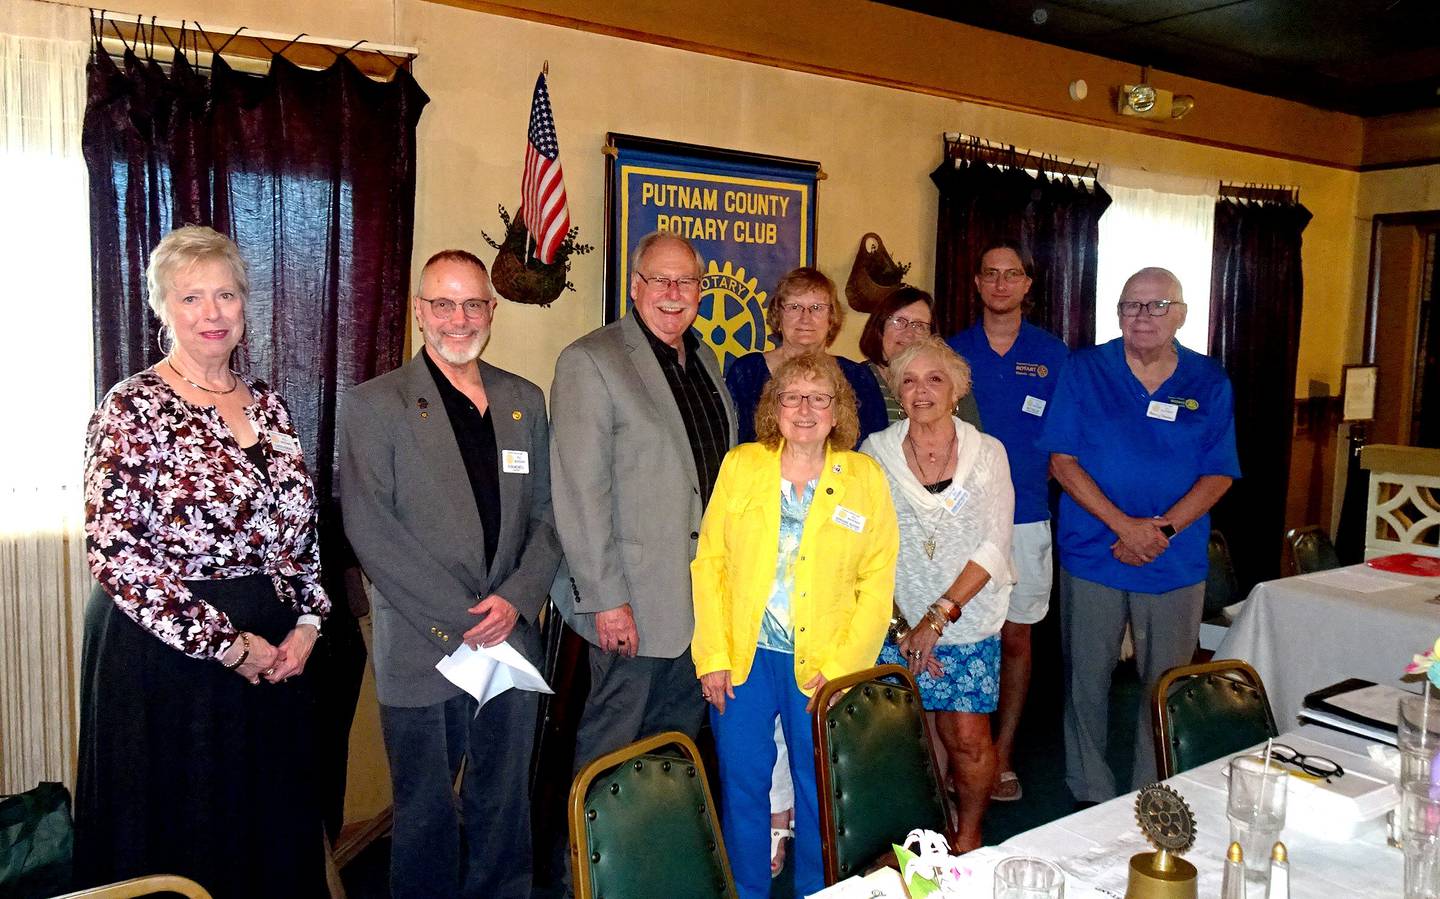 New board members installed at Putnam County Rotary’s annual banquet included (standing from left): President Cheri Adrian, Pastor Ron McNeill, Scott Shore, Brenda Bickerman, Nancy Burress, Matt Miller and Barry Chrenen; and in front, outgoing President Adriane Shore and her predecessor, Debbie Buffington.